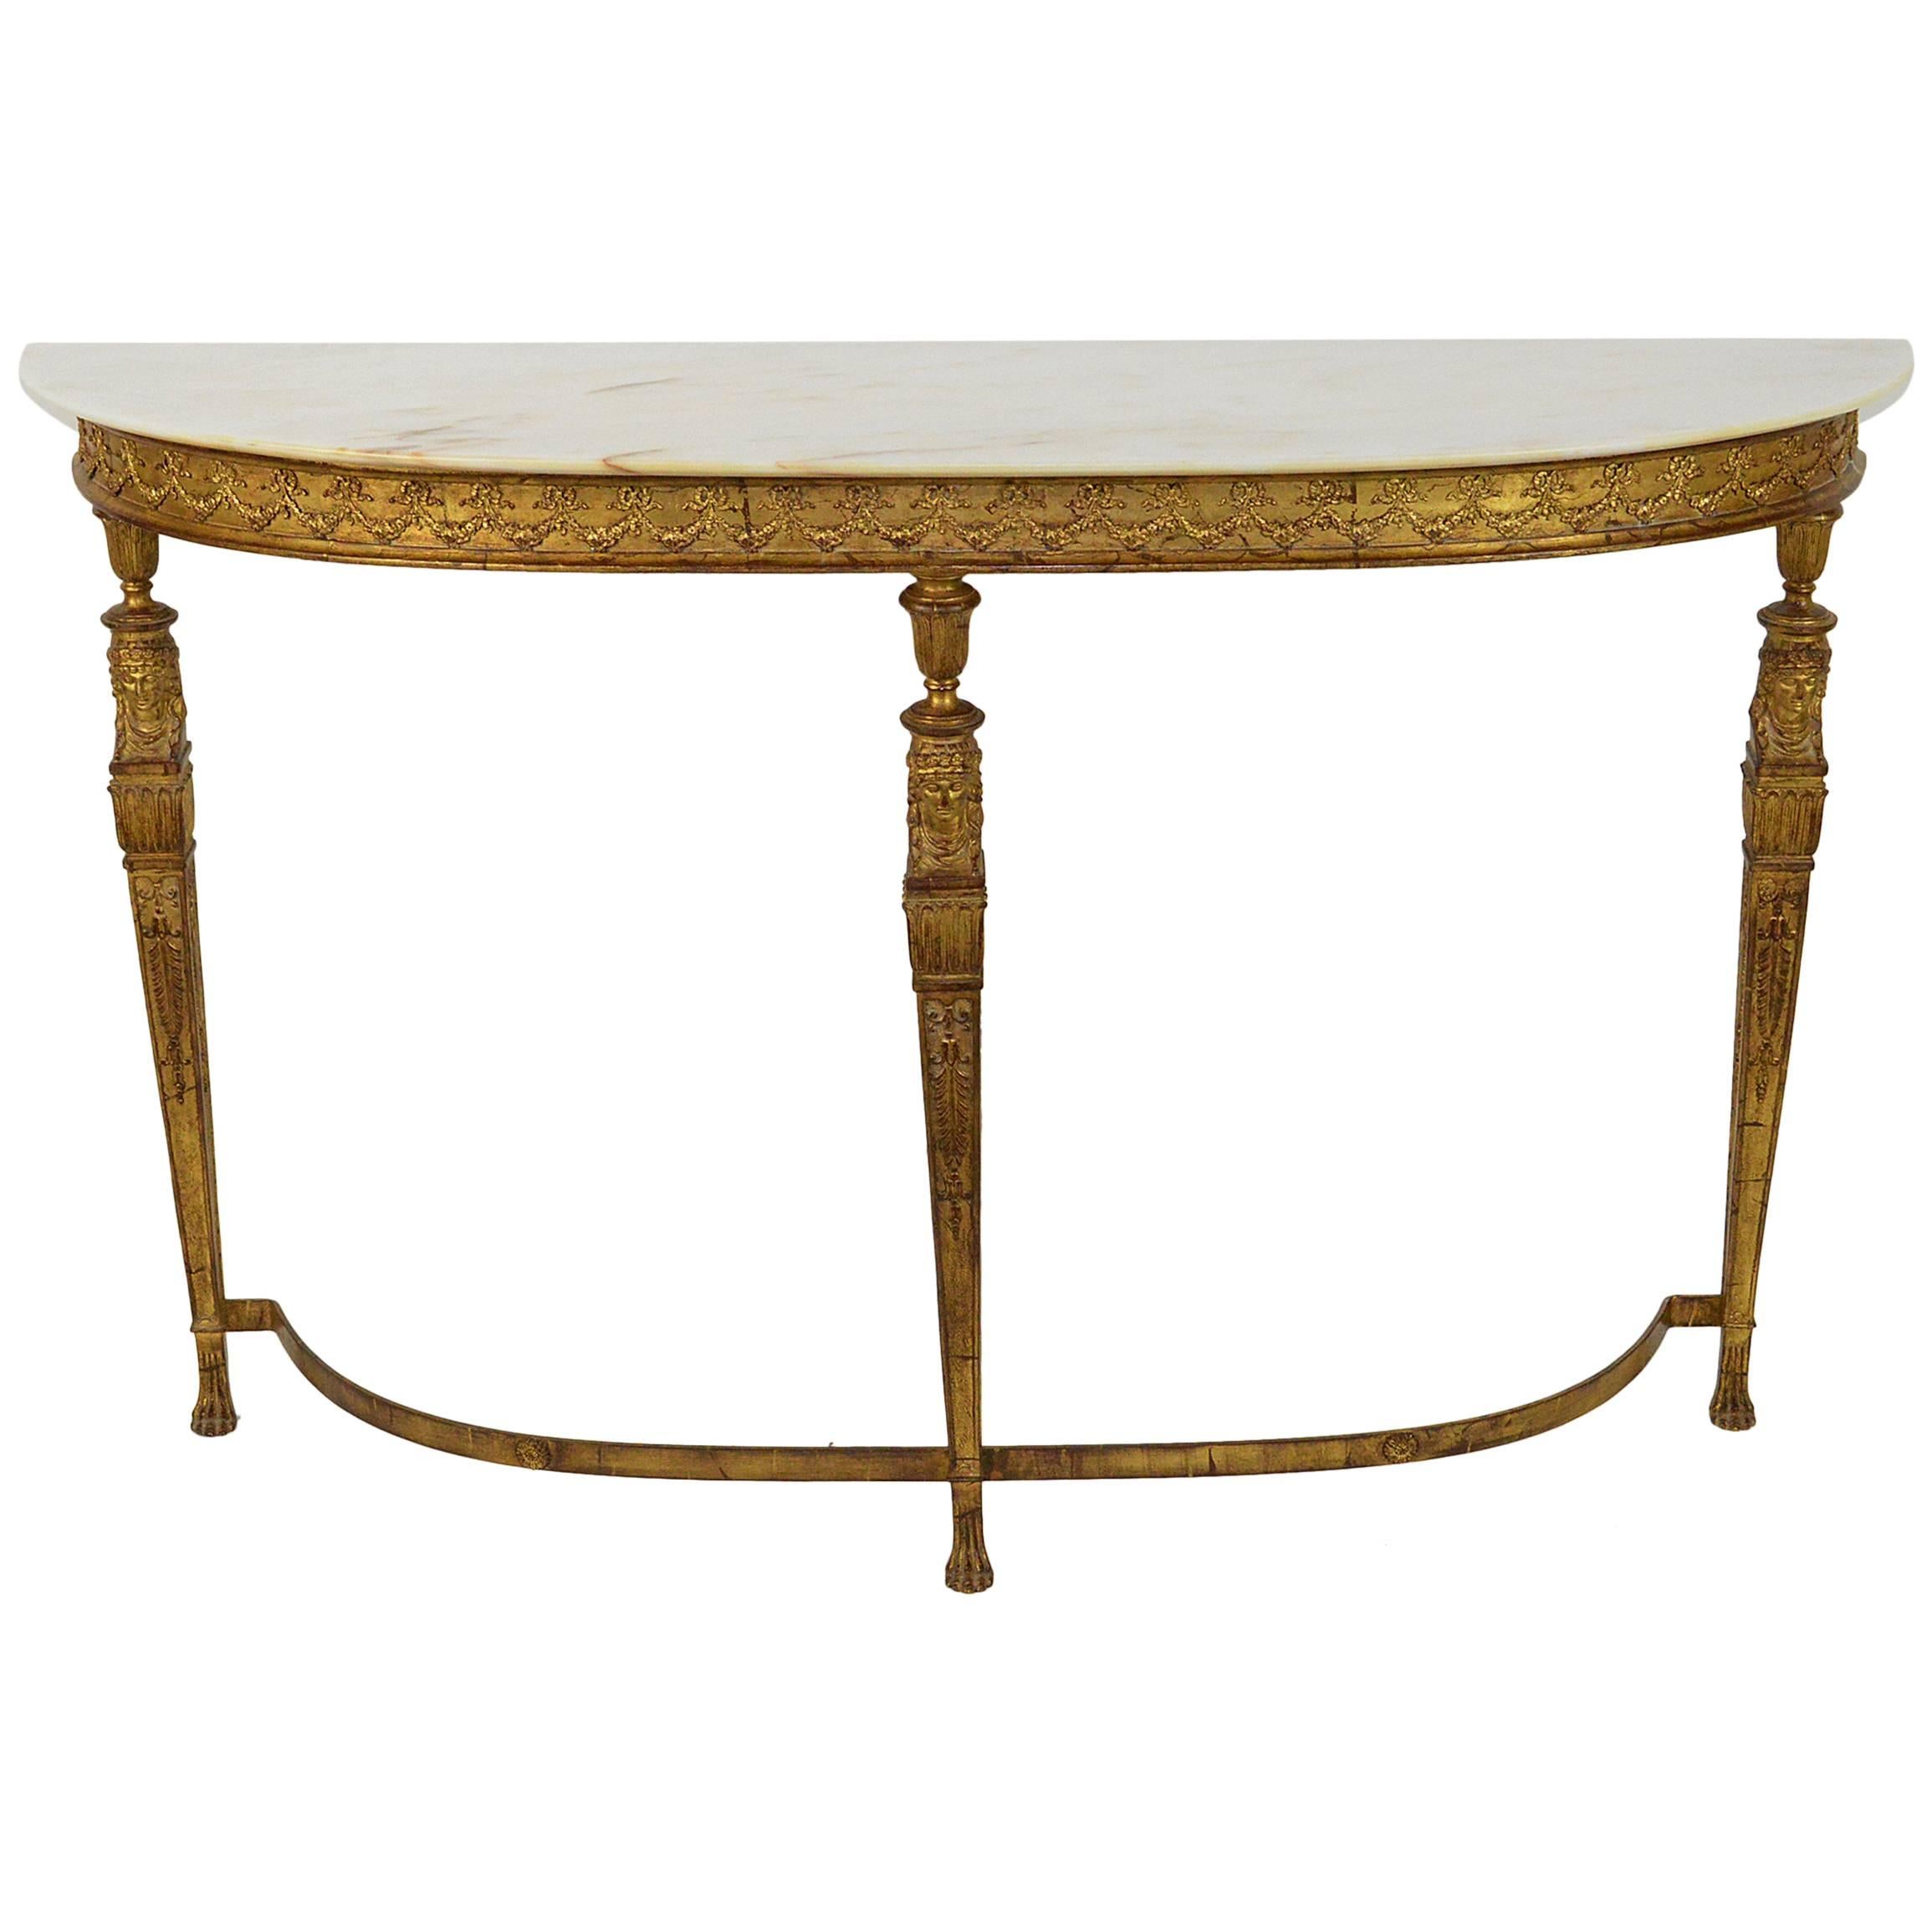 Empire Style Marble-Top and Gilt Bronze Console